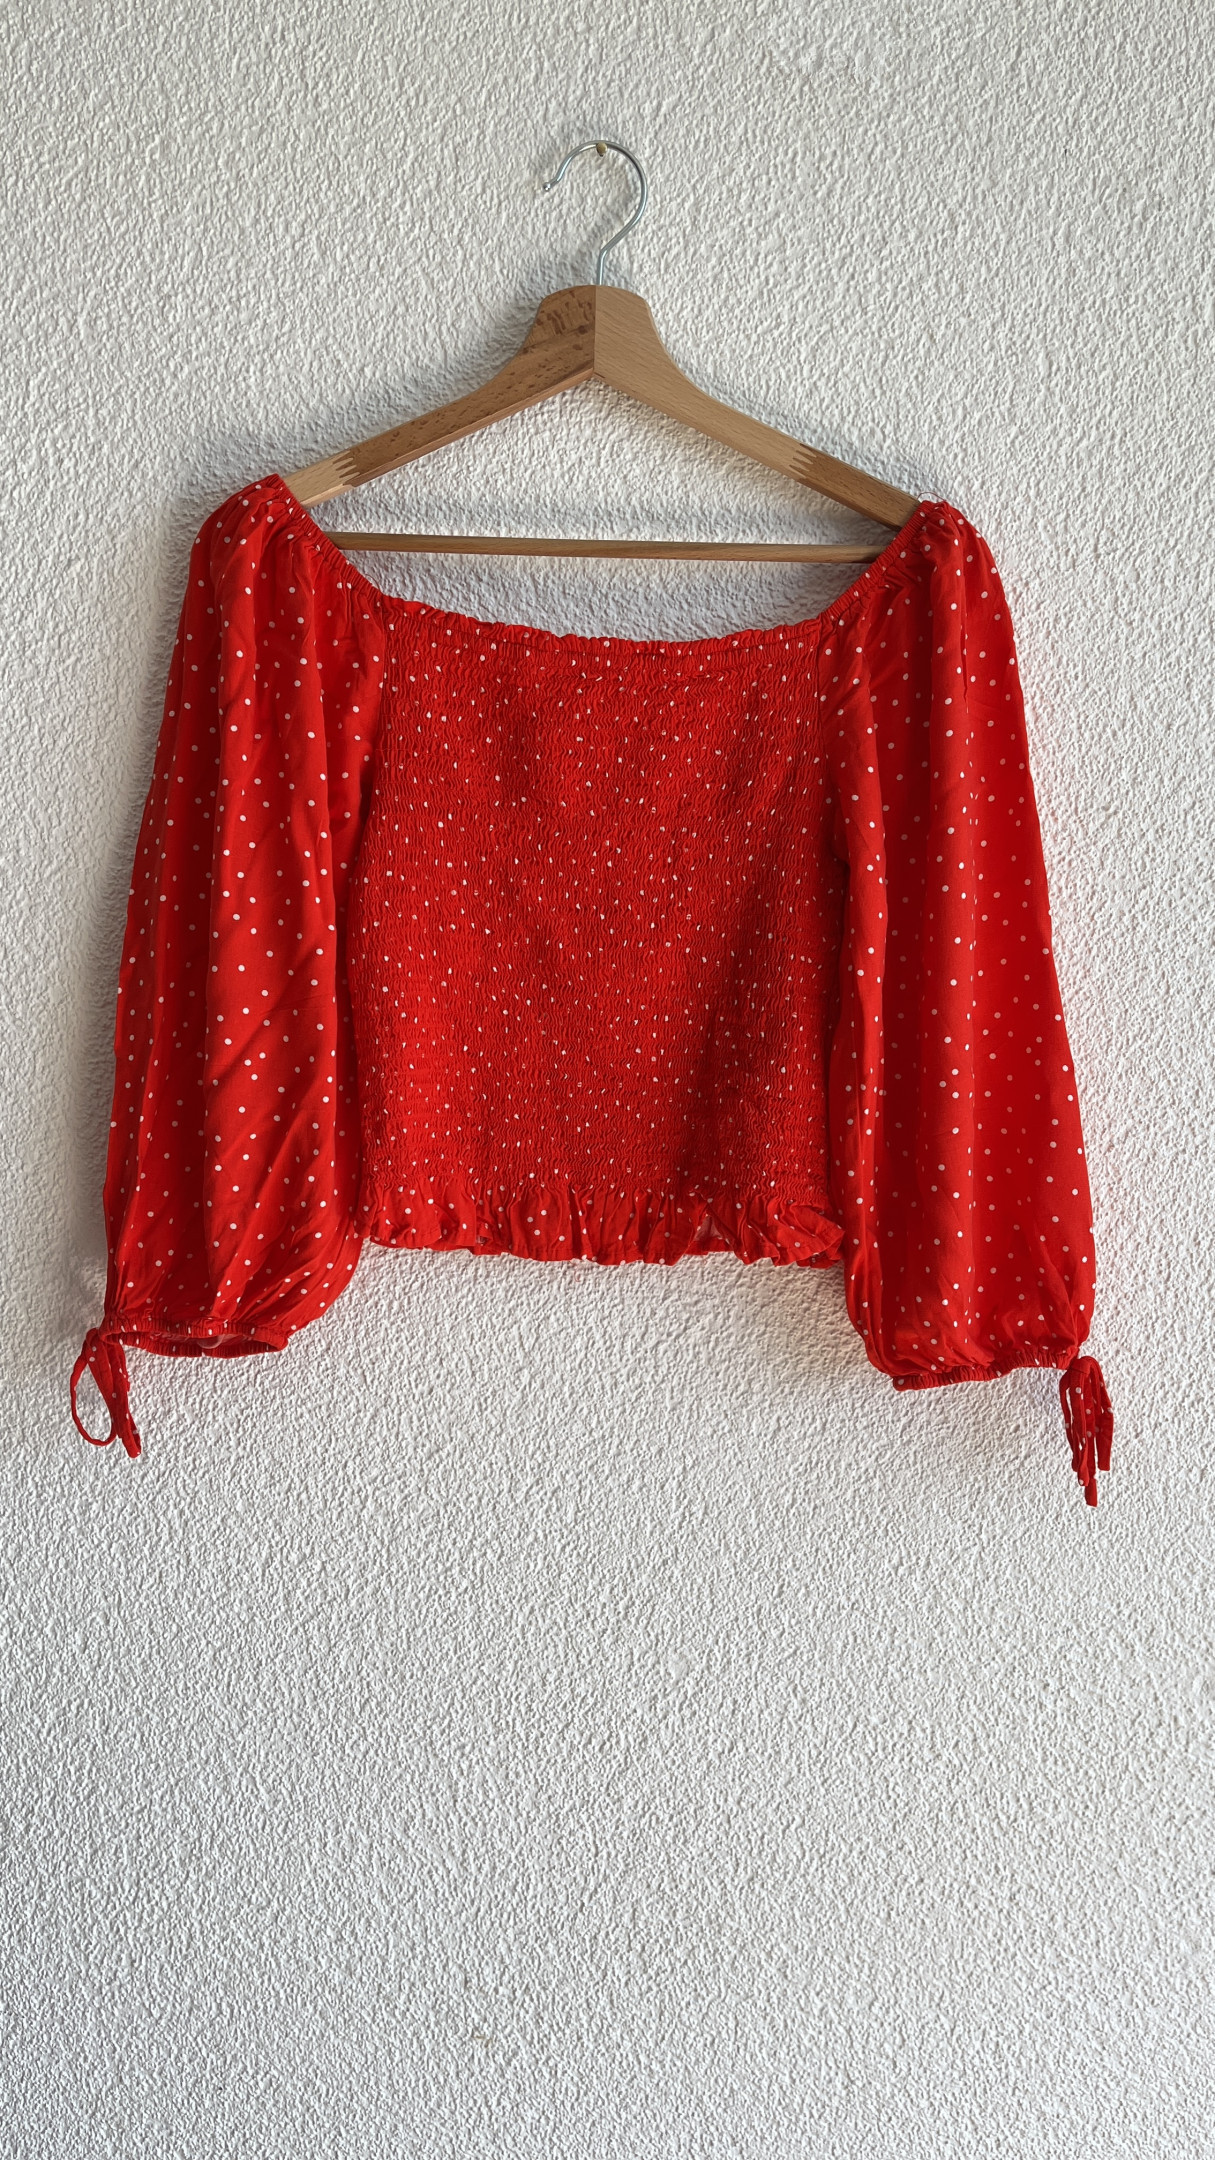 Beautiful red top with dots Size M